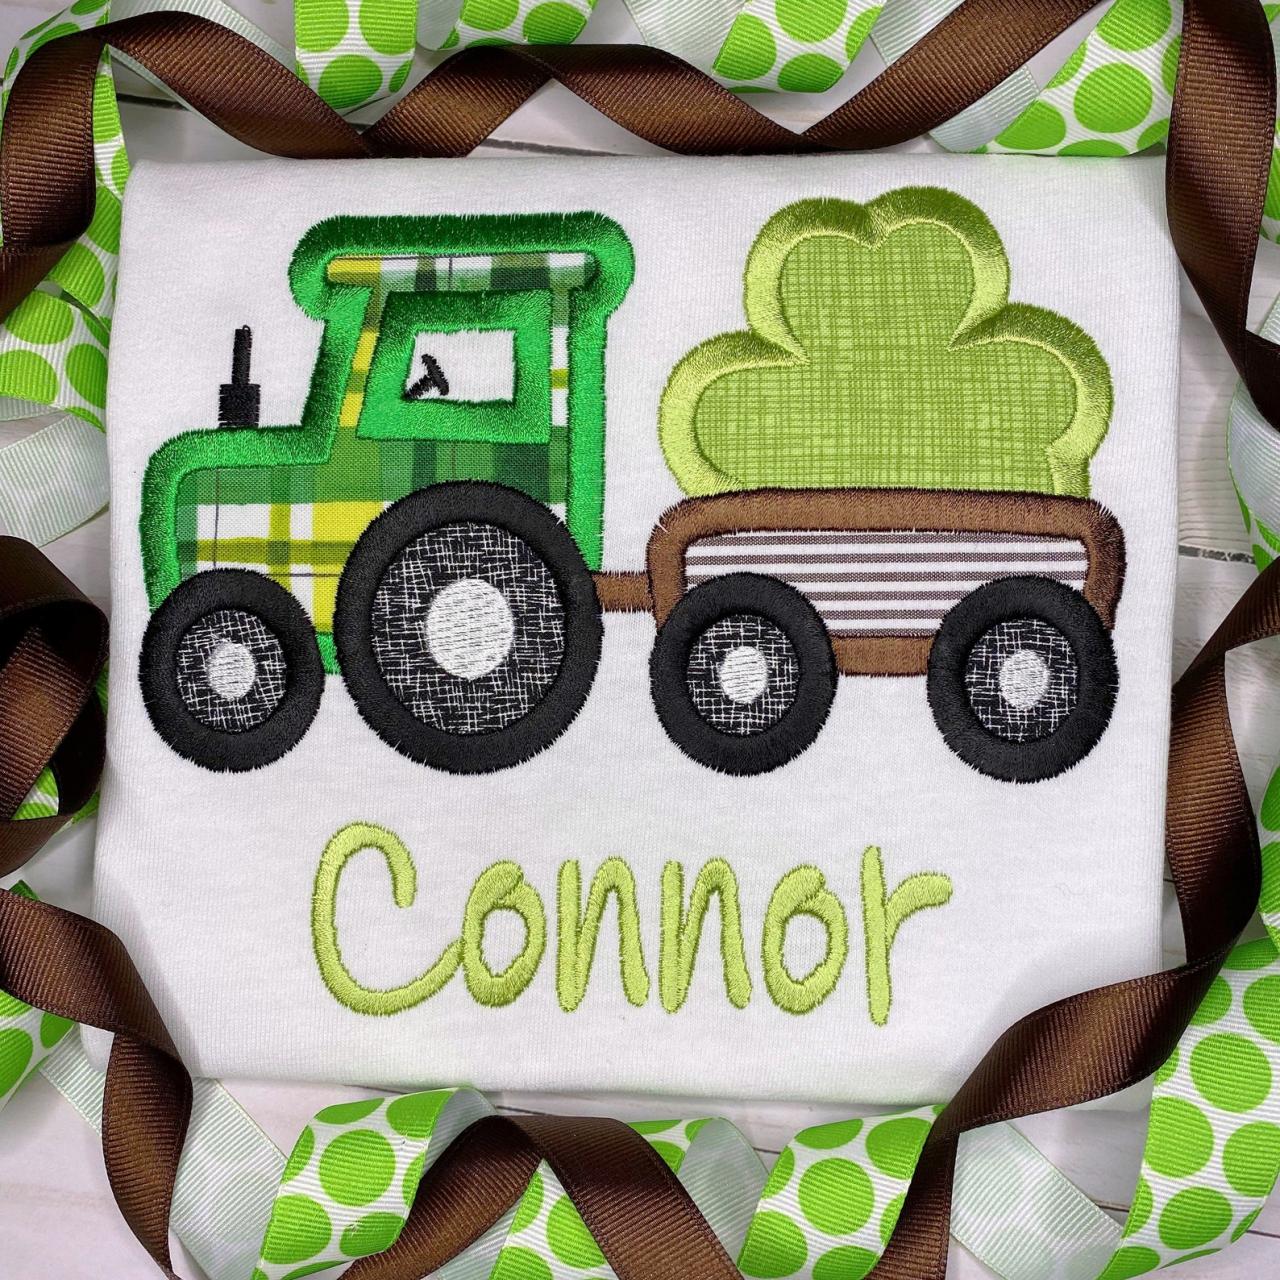 St. Patrick’s Day Shirt / Embroidered Tractor Shirt / Shamrock Shirt / Custom Embroidered Shirt / Shamrock Tractor Shirt / Monogram Shirt.